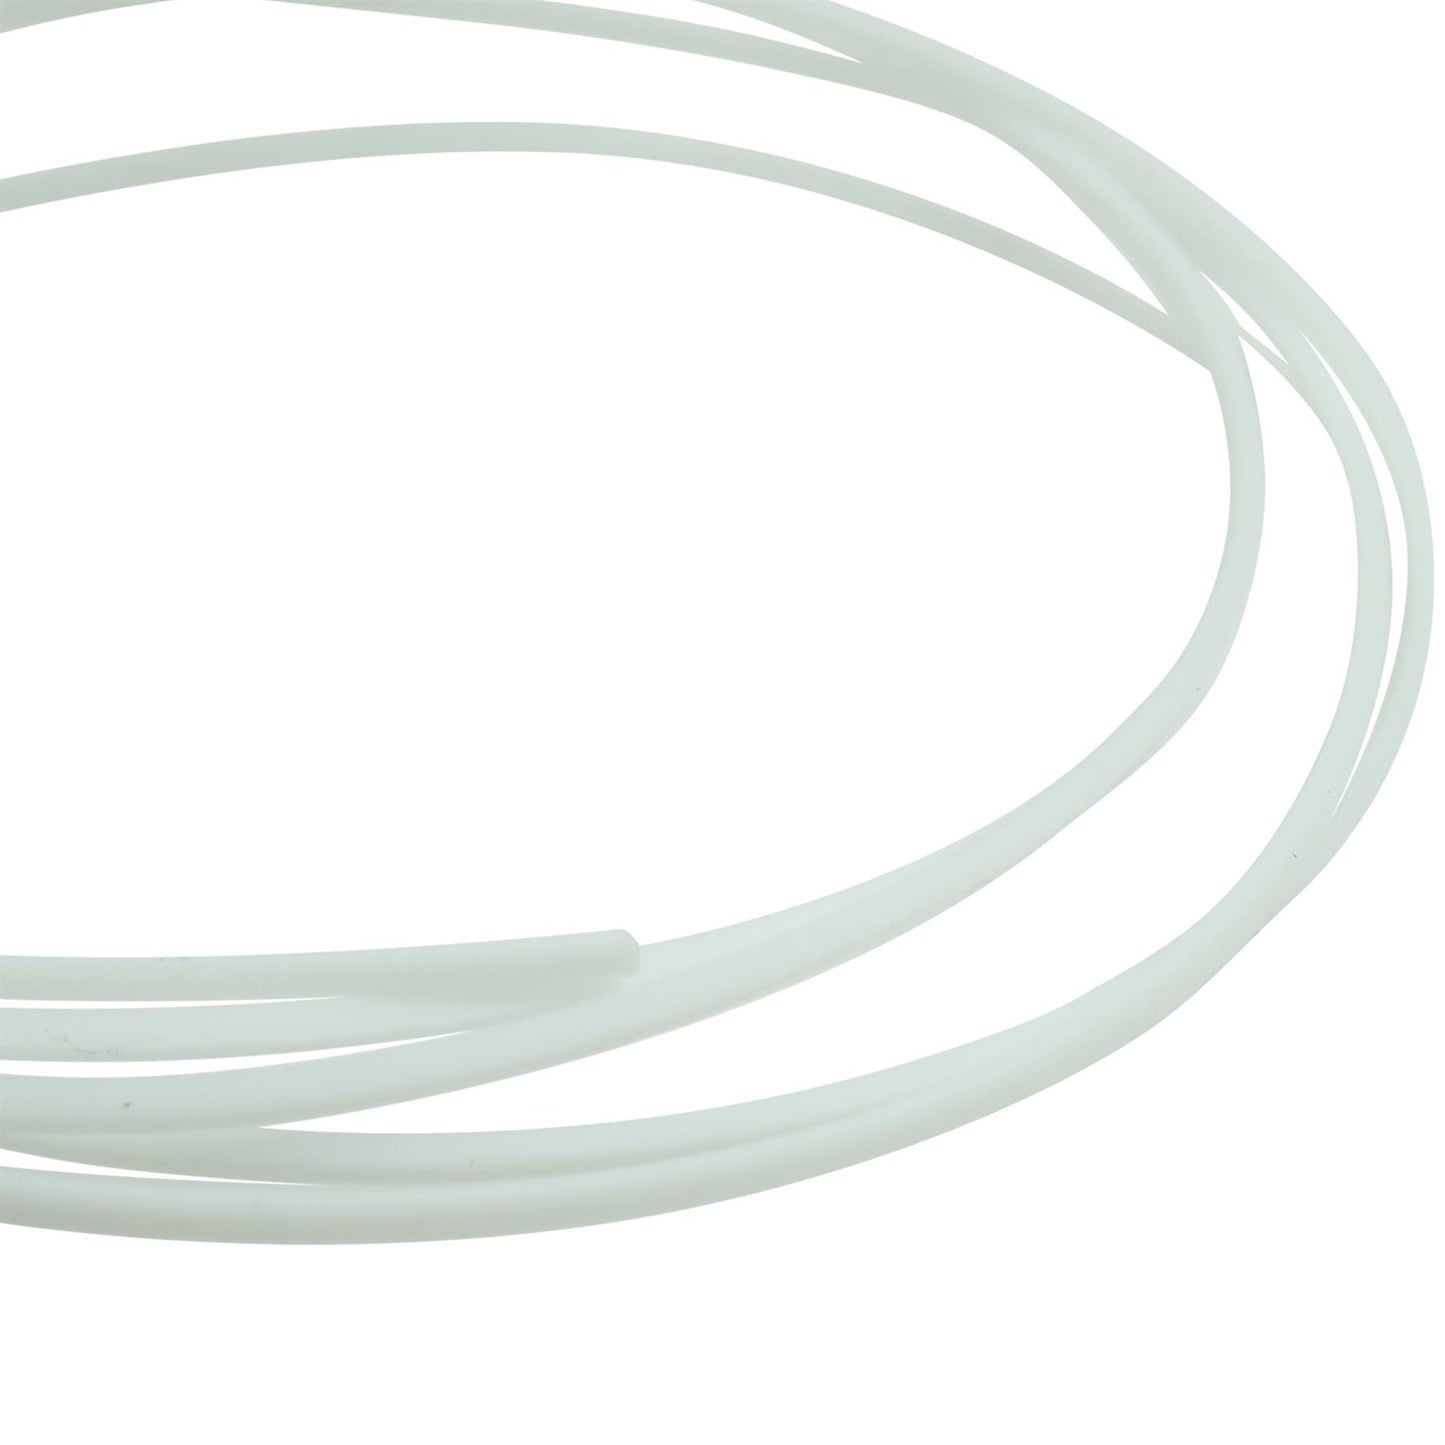 Incudo Ptfe Filler Strip For Fitting Purfling - 2m x 1.5x1.5mm